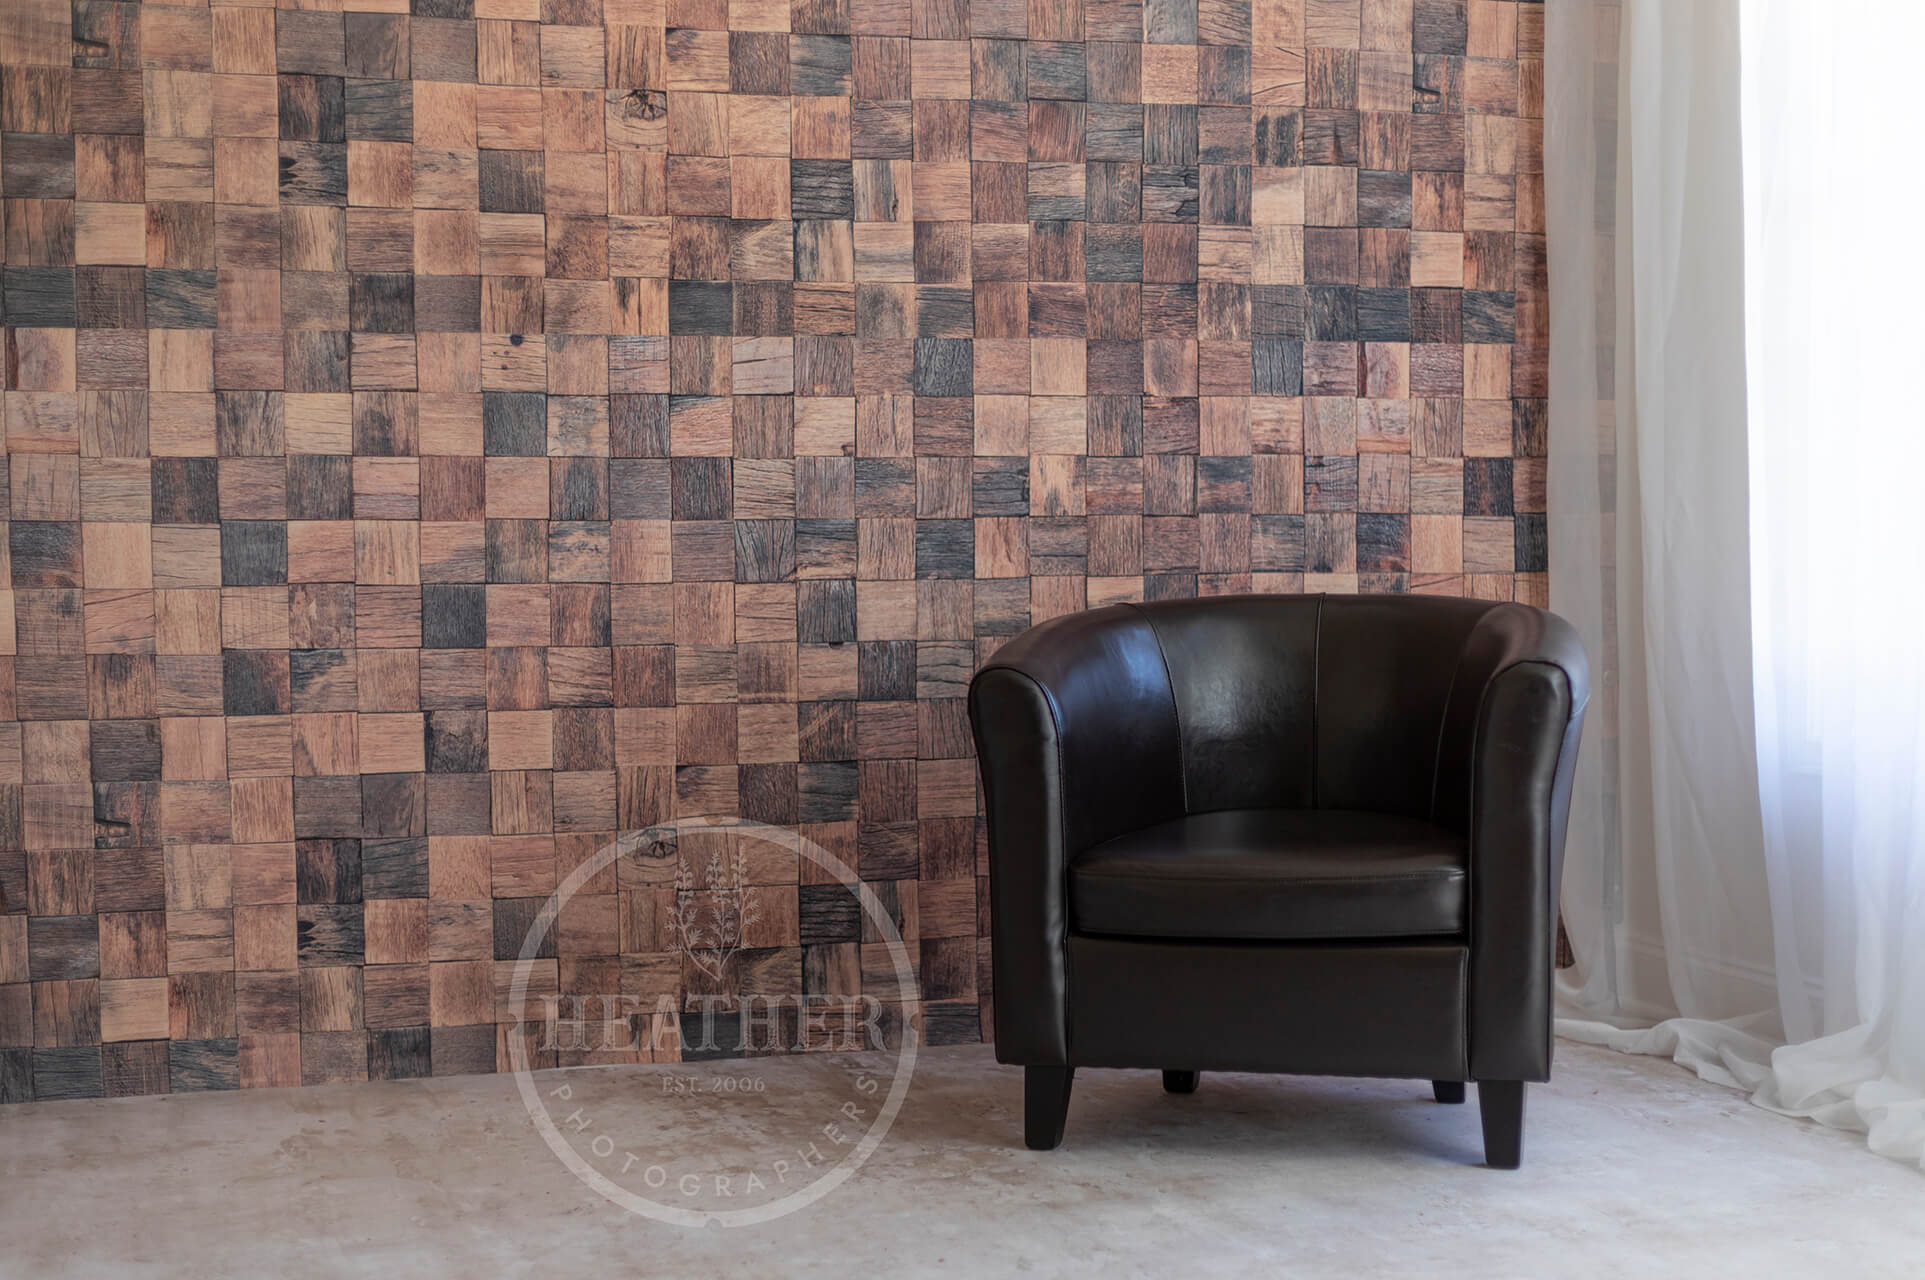 Introduce a touch of warmth and texture with a wood block backdrop